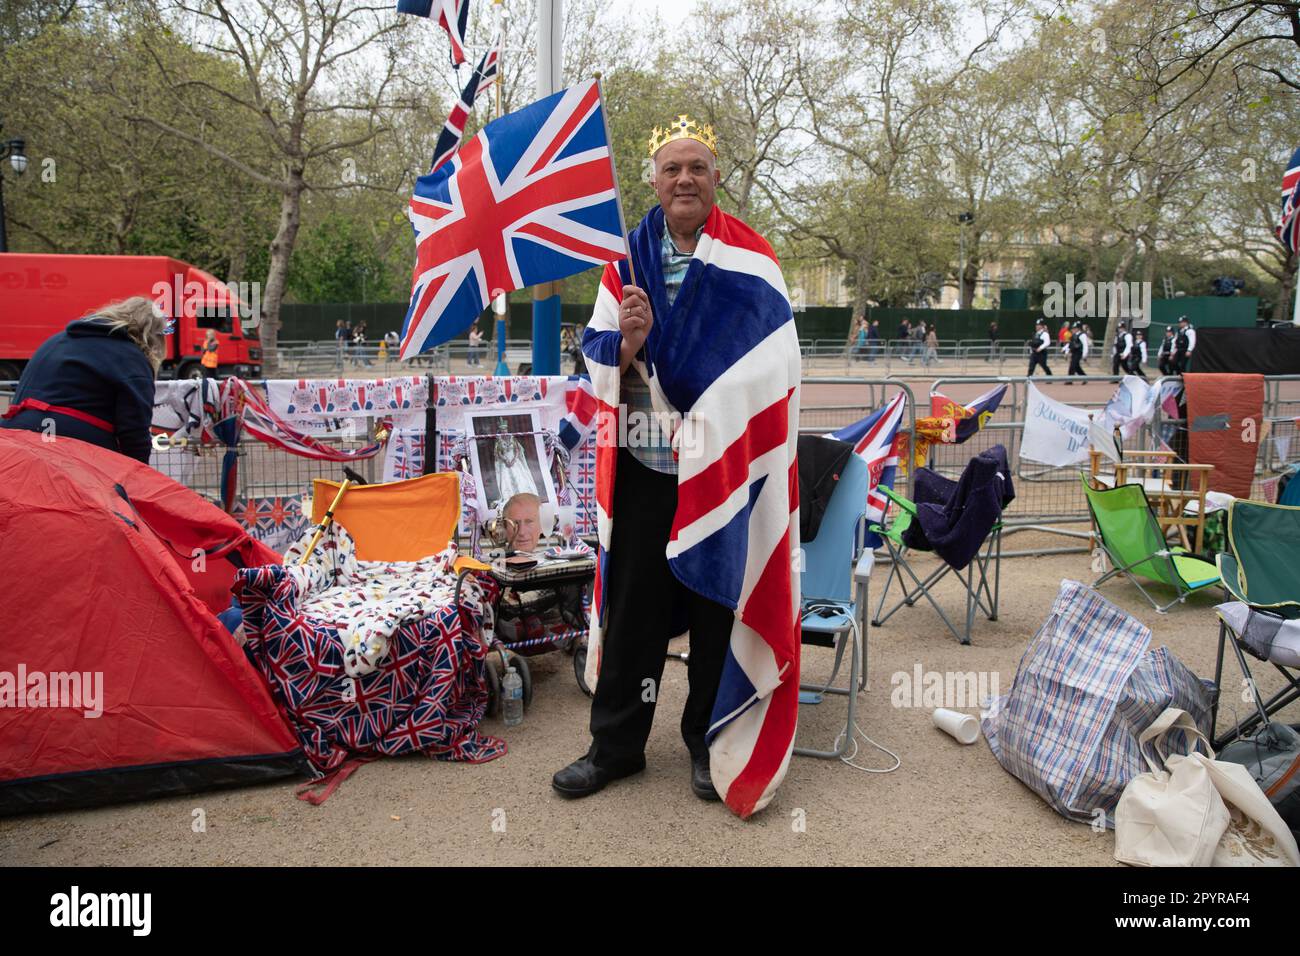 London, UK. 4th May, 2023. Royal fans camp on The Mall ahead of the Coronation, The Coronation of King Charles III and The Queen Consort will take place on May 6 2023. Credit: Lucy North/Alamy Live News Stock Photo